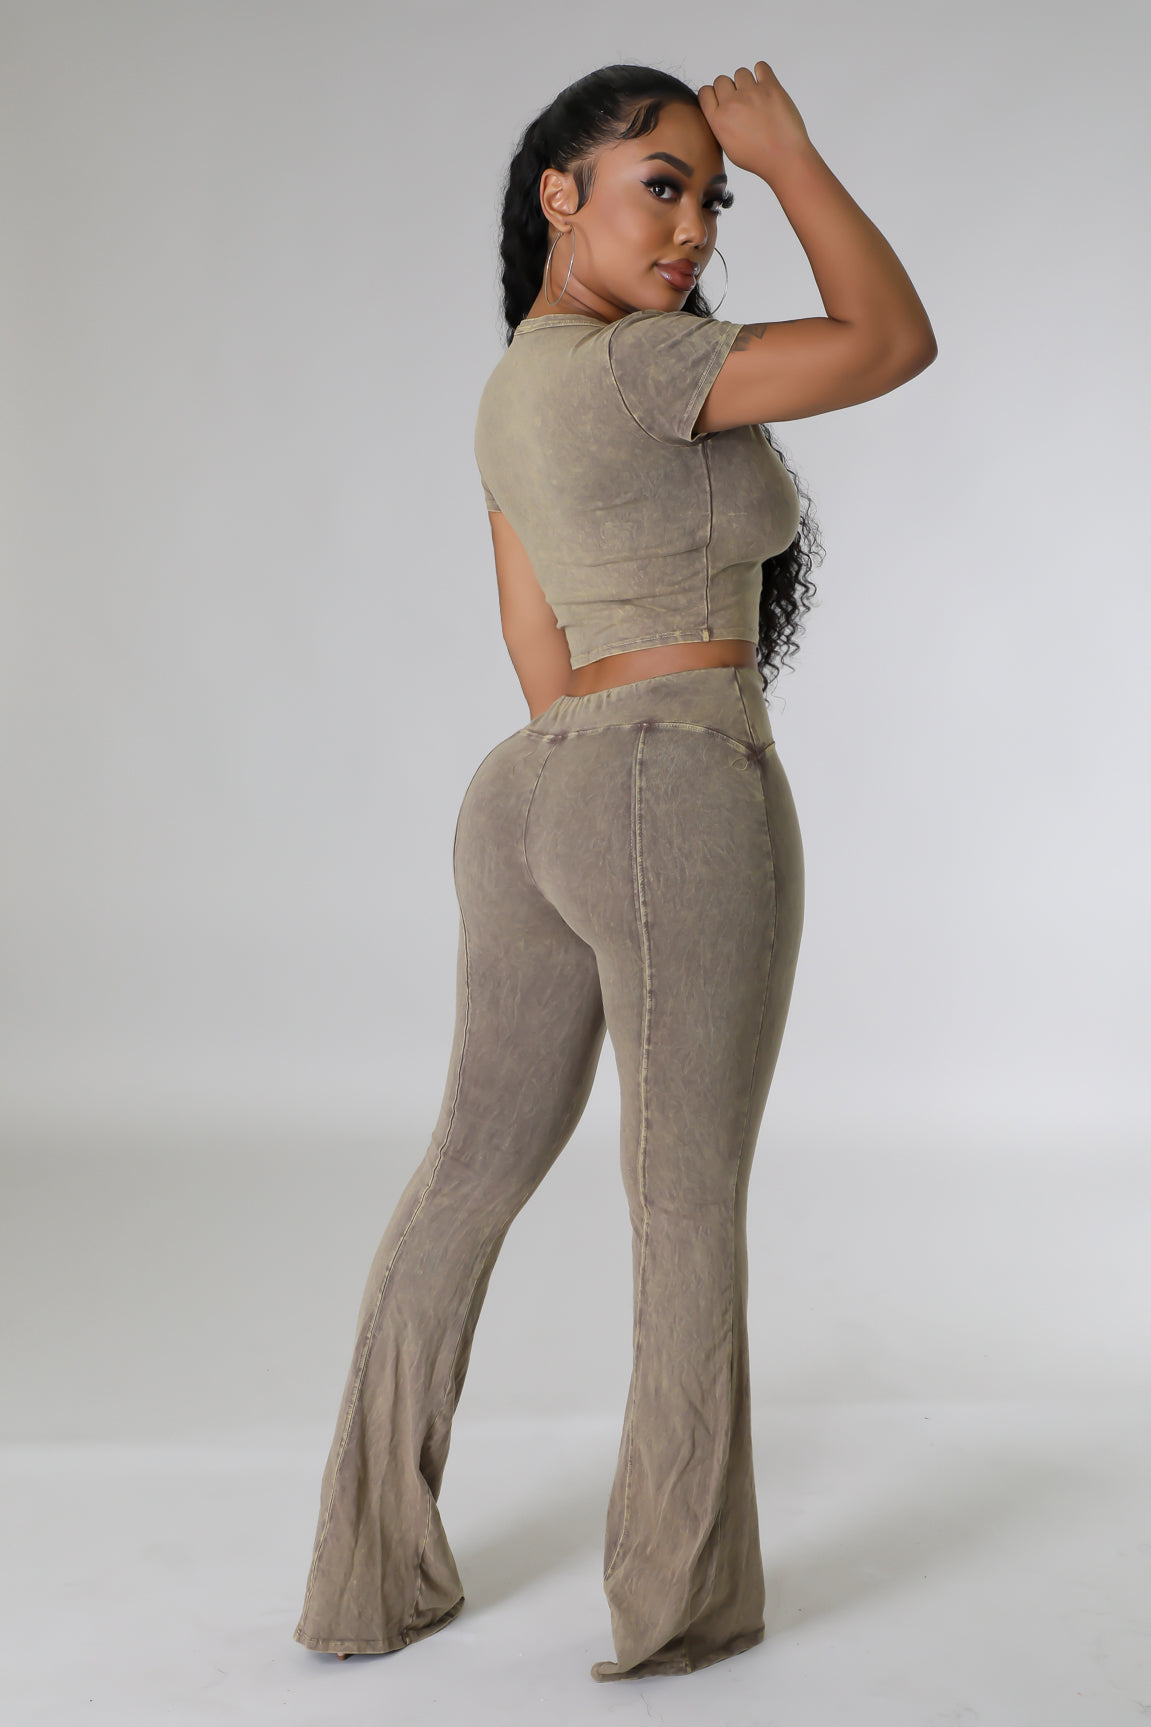 Lazy Afternoon Pant Set